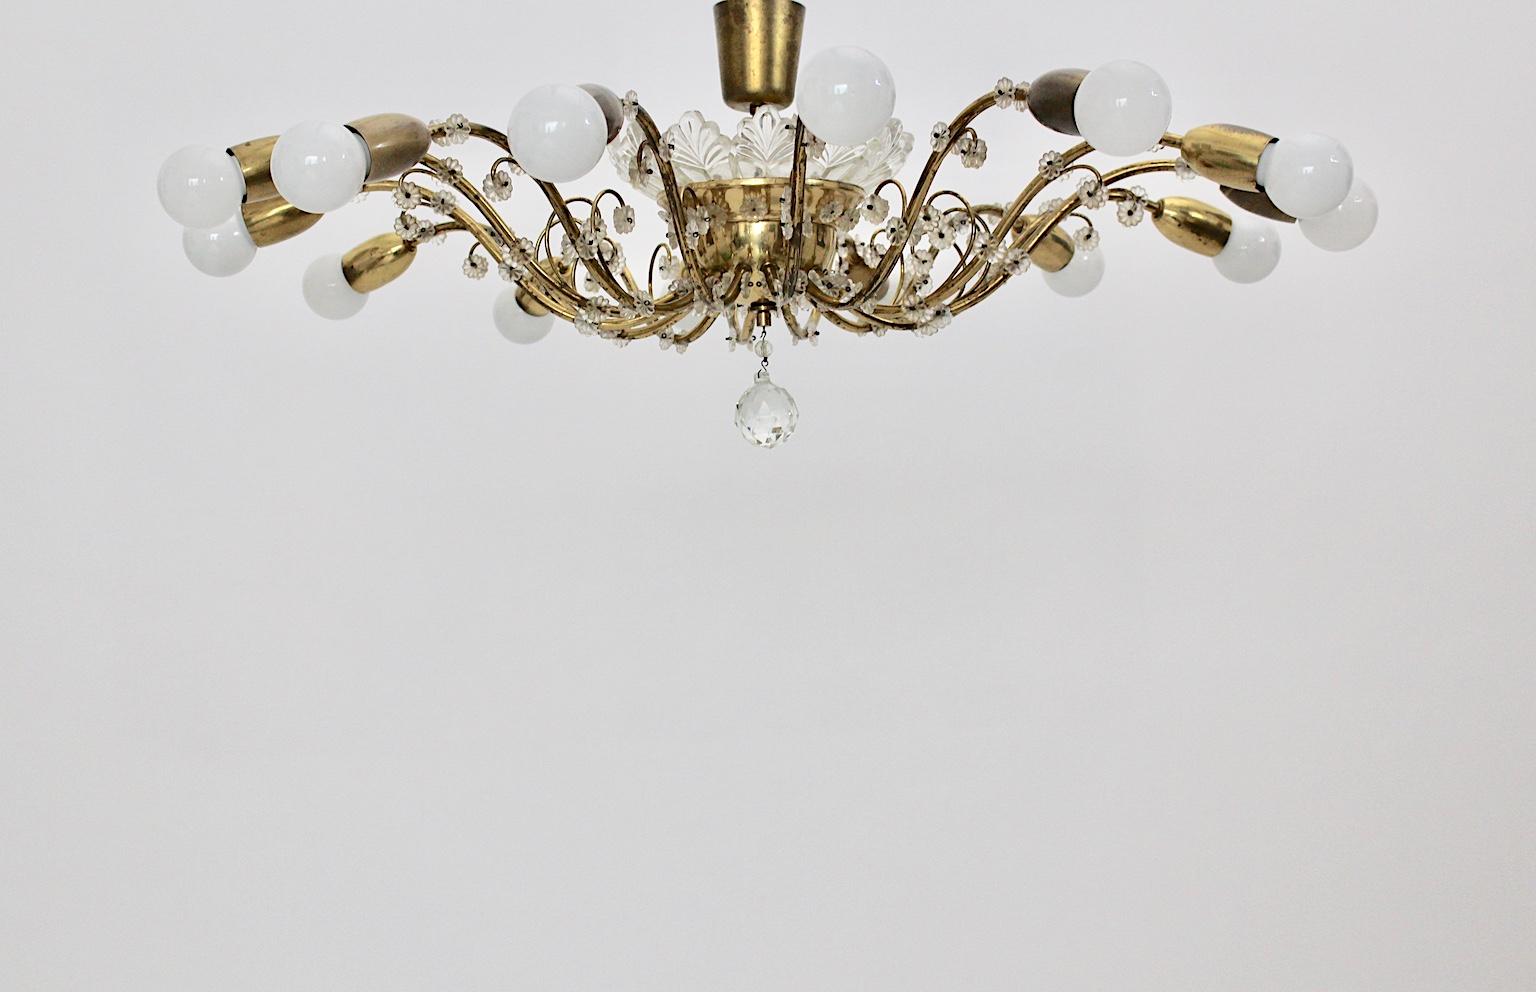 A high-end Mid-Century Modern vintage brass and crystal glass chandelier or flush mount with 14 arms which was designed and executed by the popular firm J. & L. Lobmeyr in the heart of Europe, in Austria.
The vintage flushmount or chandelier was